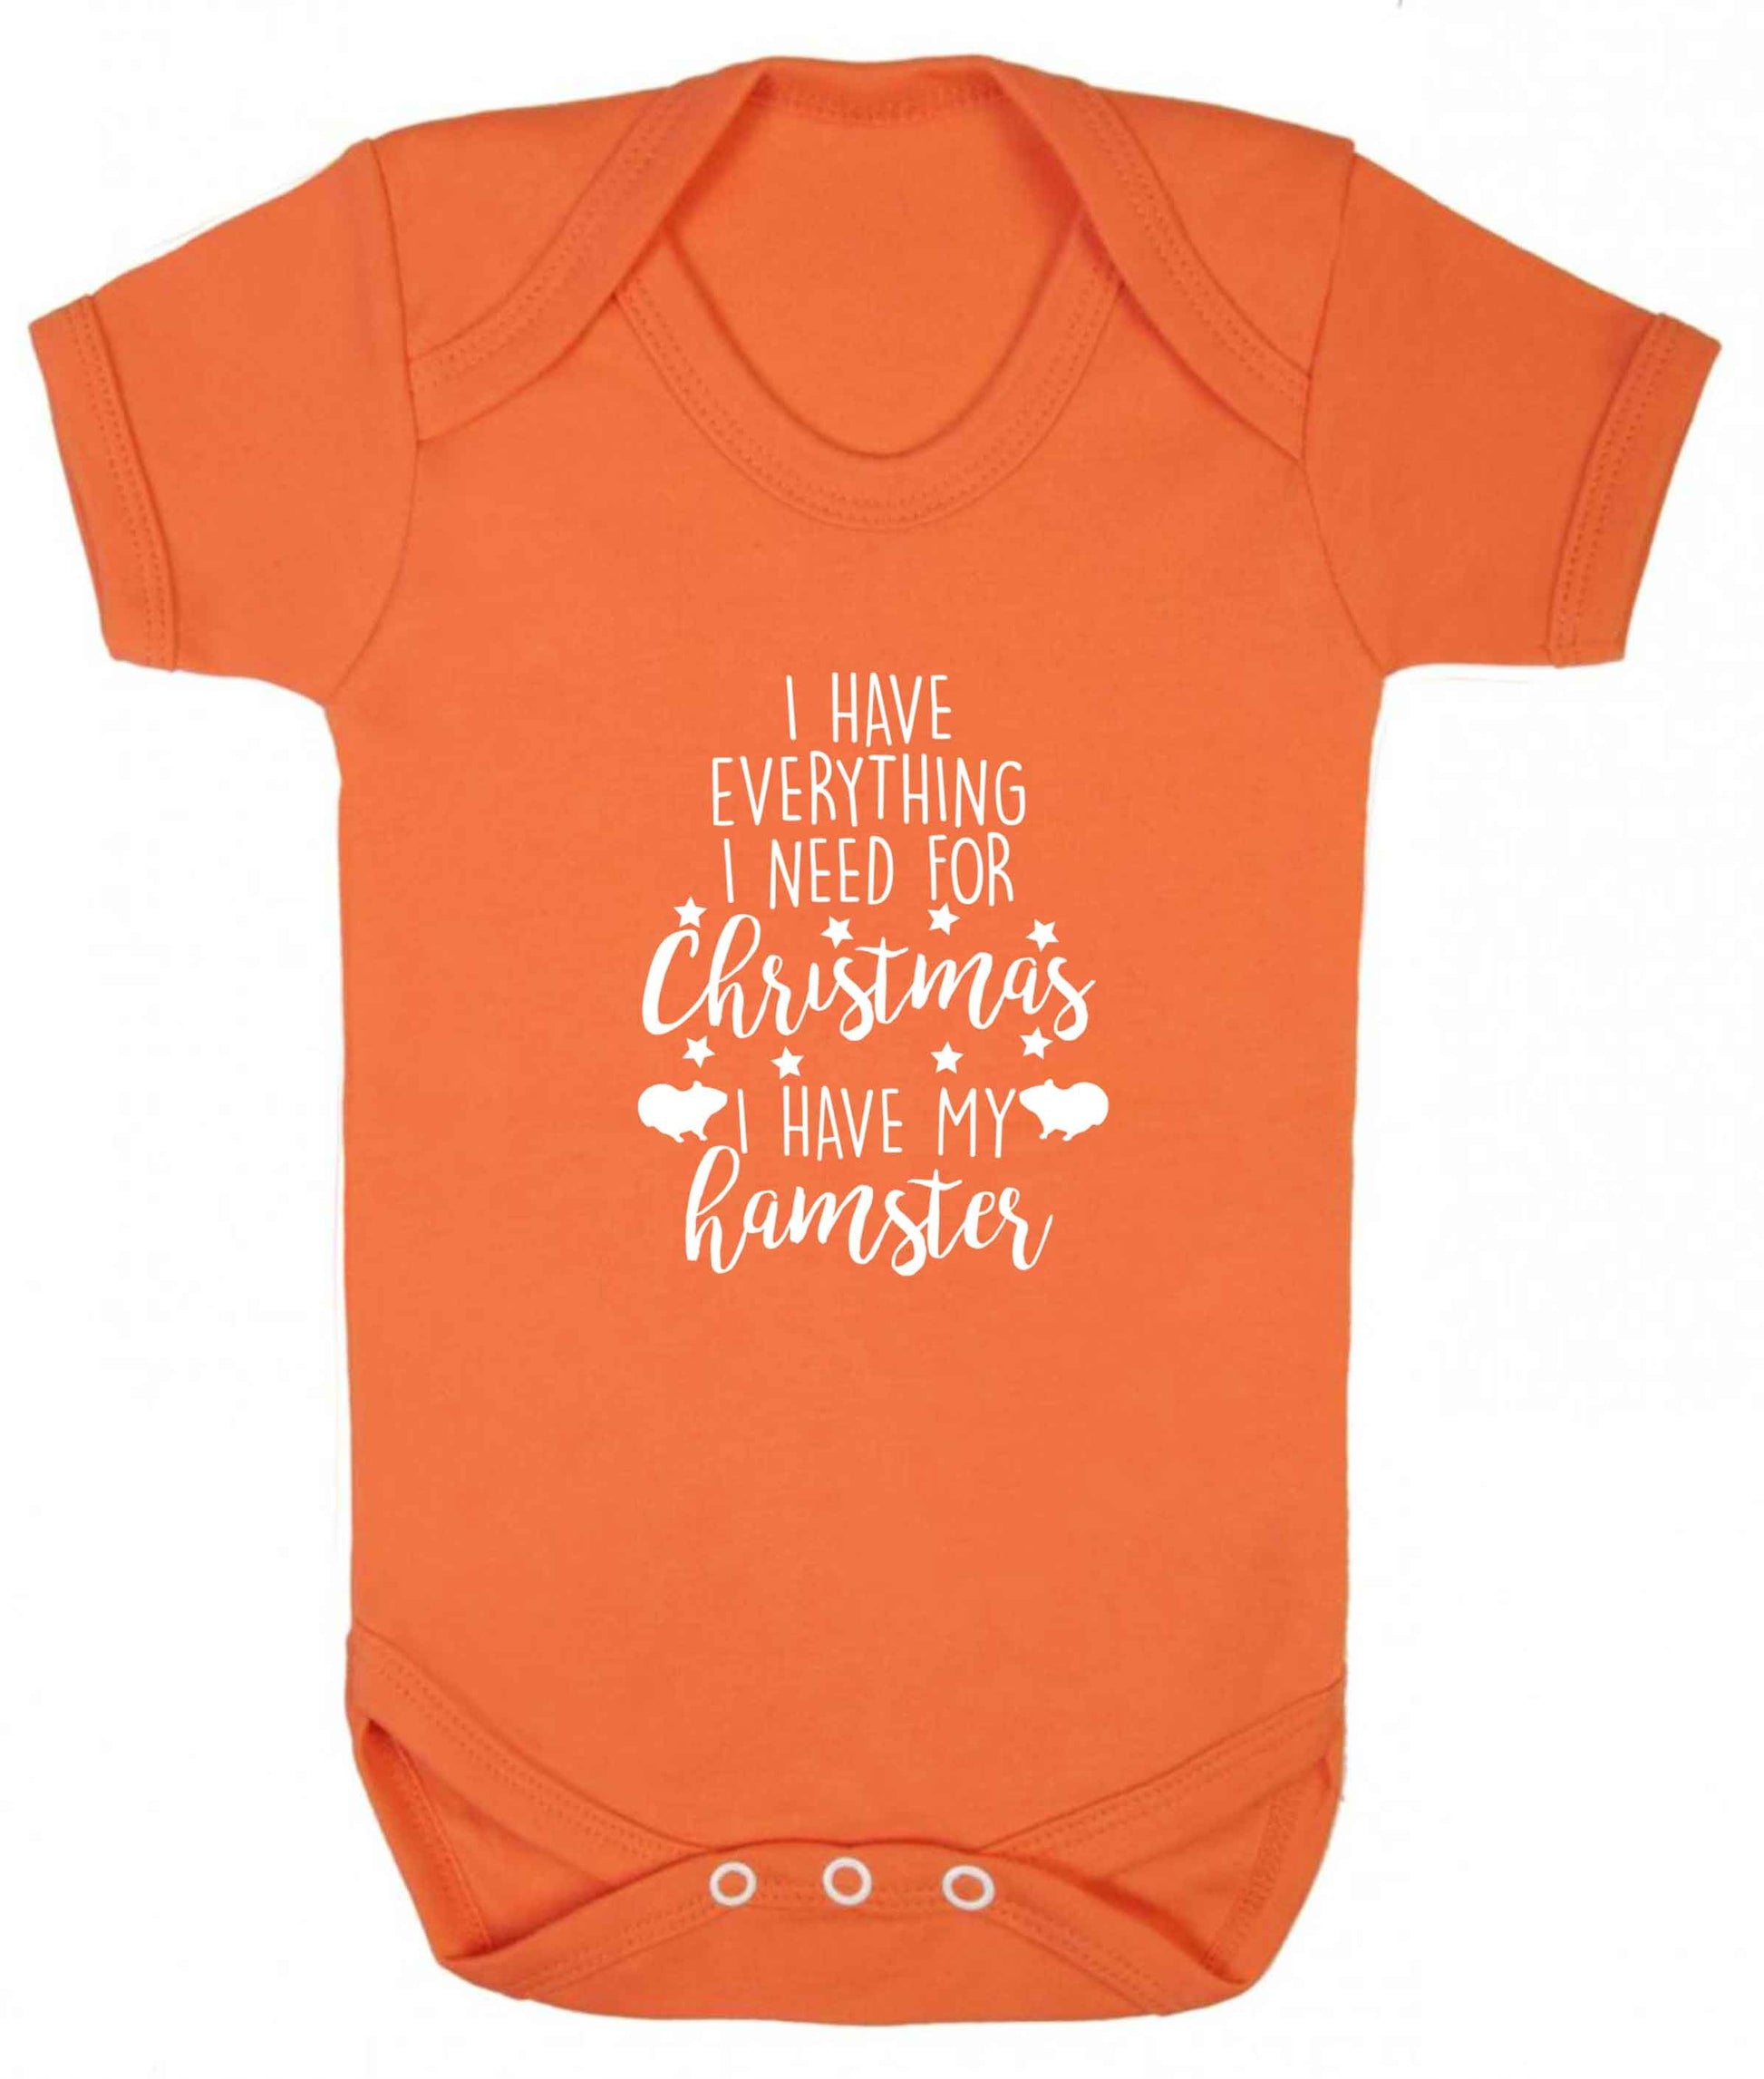 I have everything I need for Christmas I have my hamster baby vest orange 18-24 months